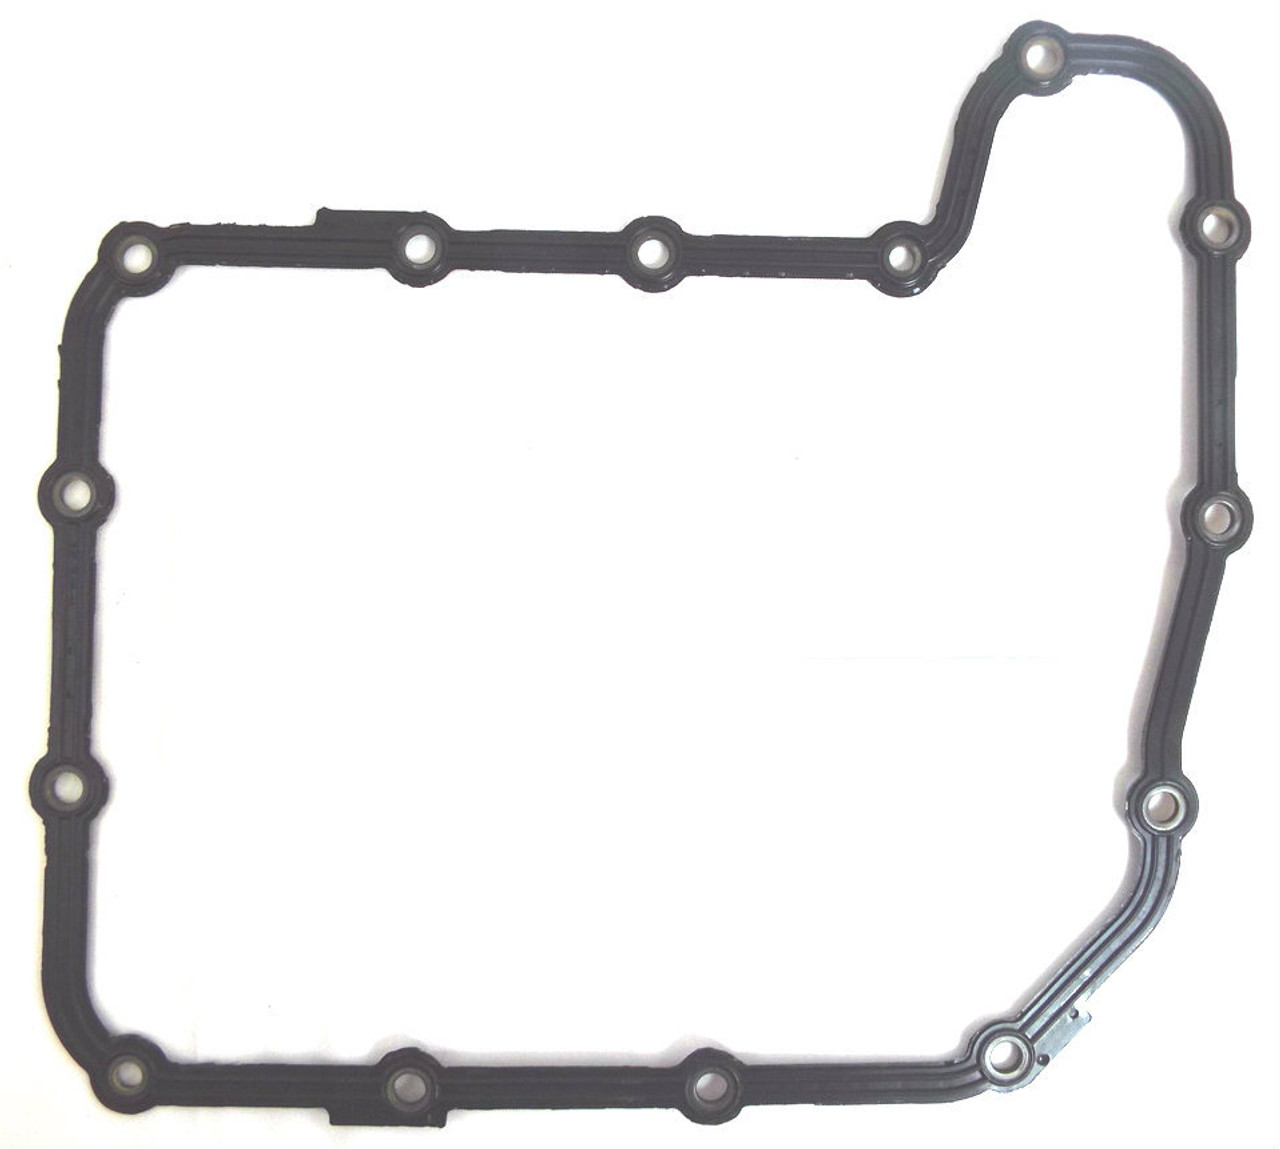 High Quality Molded Rubber Ford/Mazda CD4E Transmission Oil Pan Gasket
3L8Z-7F396-AB